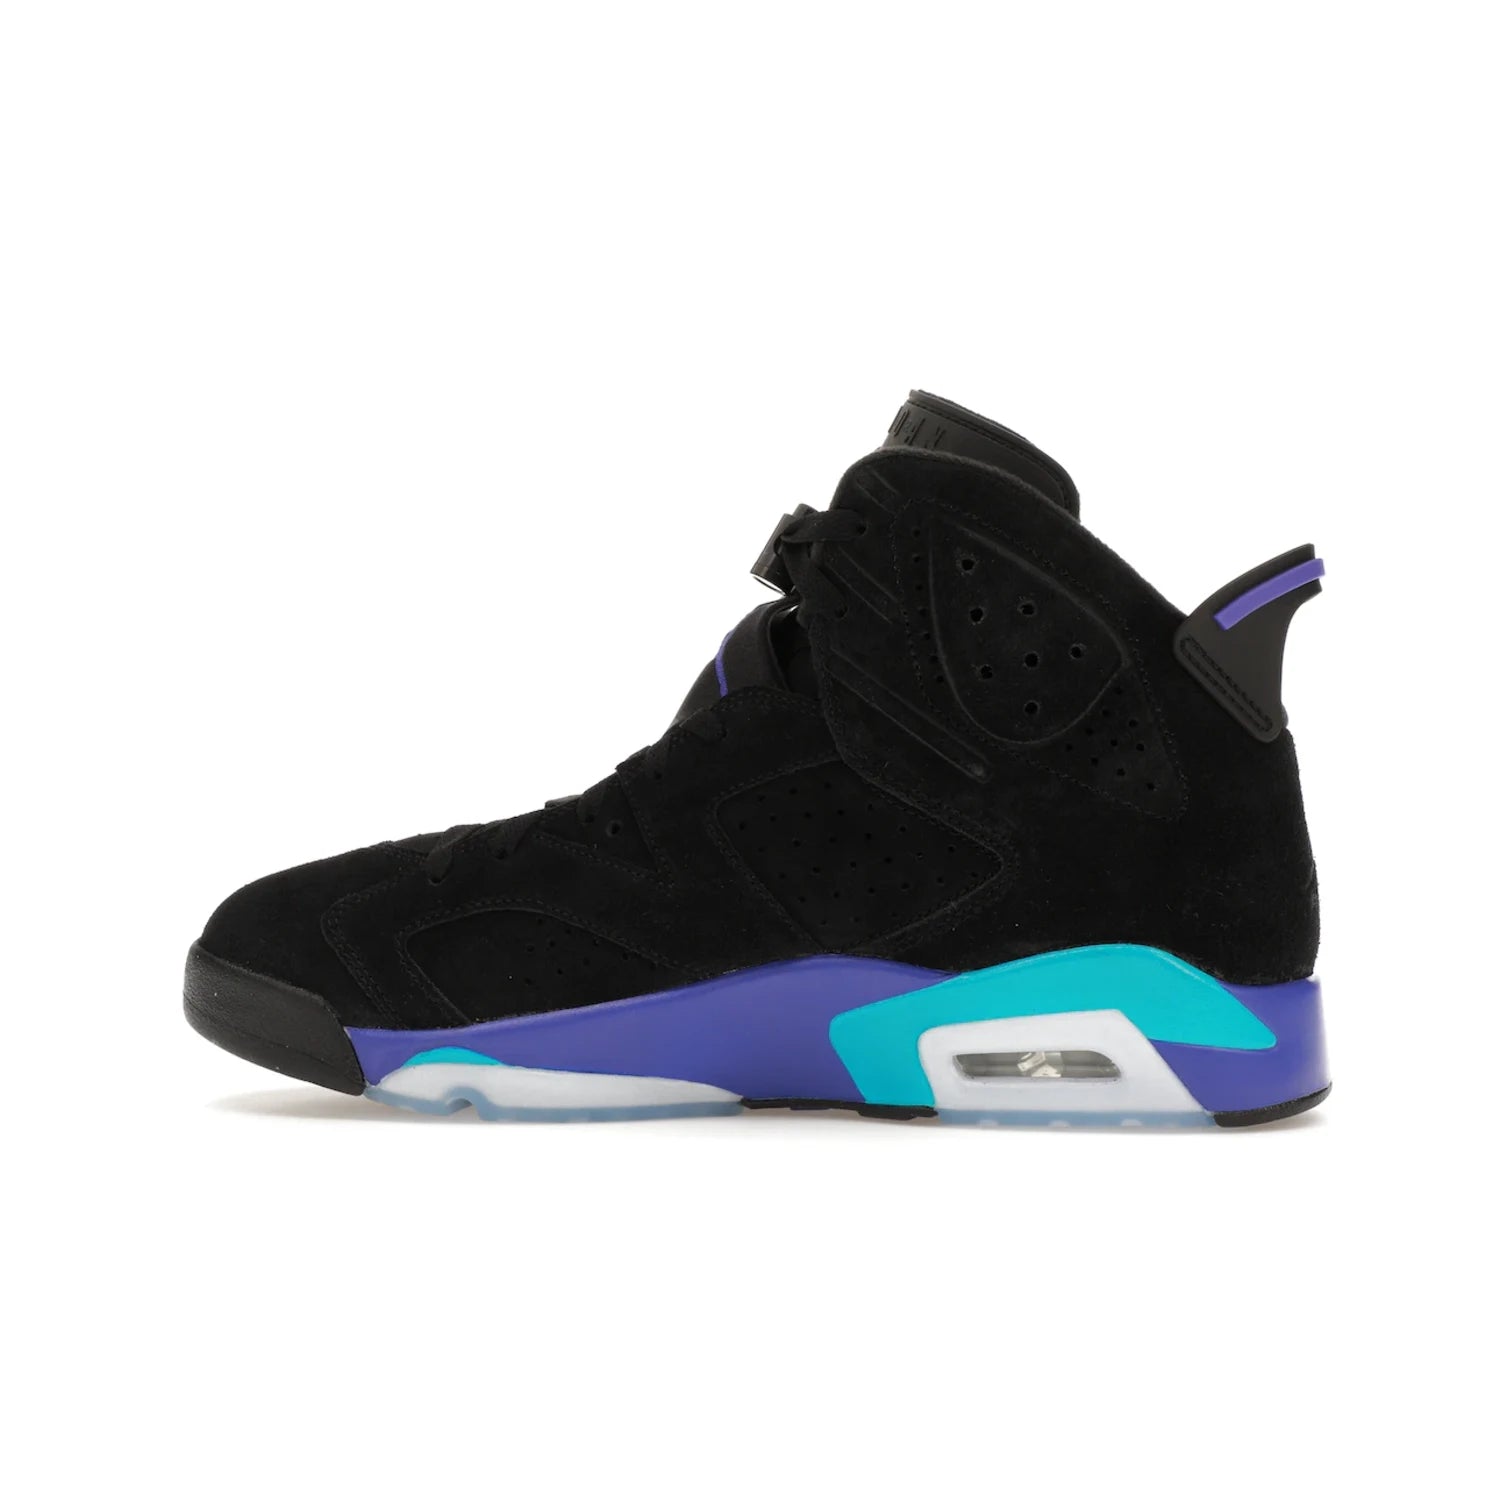 Jordan 6 Retro Aqua - Image 20 - Only at www.BallersClubKickz.com - Feel the classic Jordan 6 Retro Aqua paired with modern style. Black, Bright Concord, and Aquatone hues are crafted with a supple suede and rubberized heel tab. This standout sneaker adds signature Jordan elements at $200. Elevate your style with the Jordan 6 Retro Aqua.